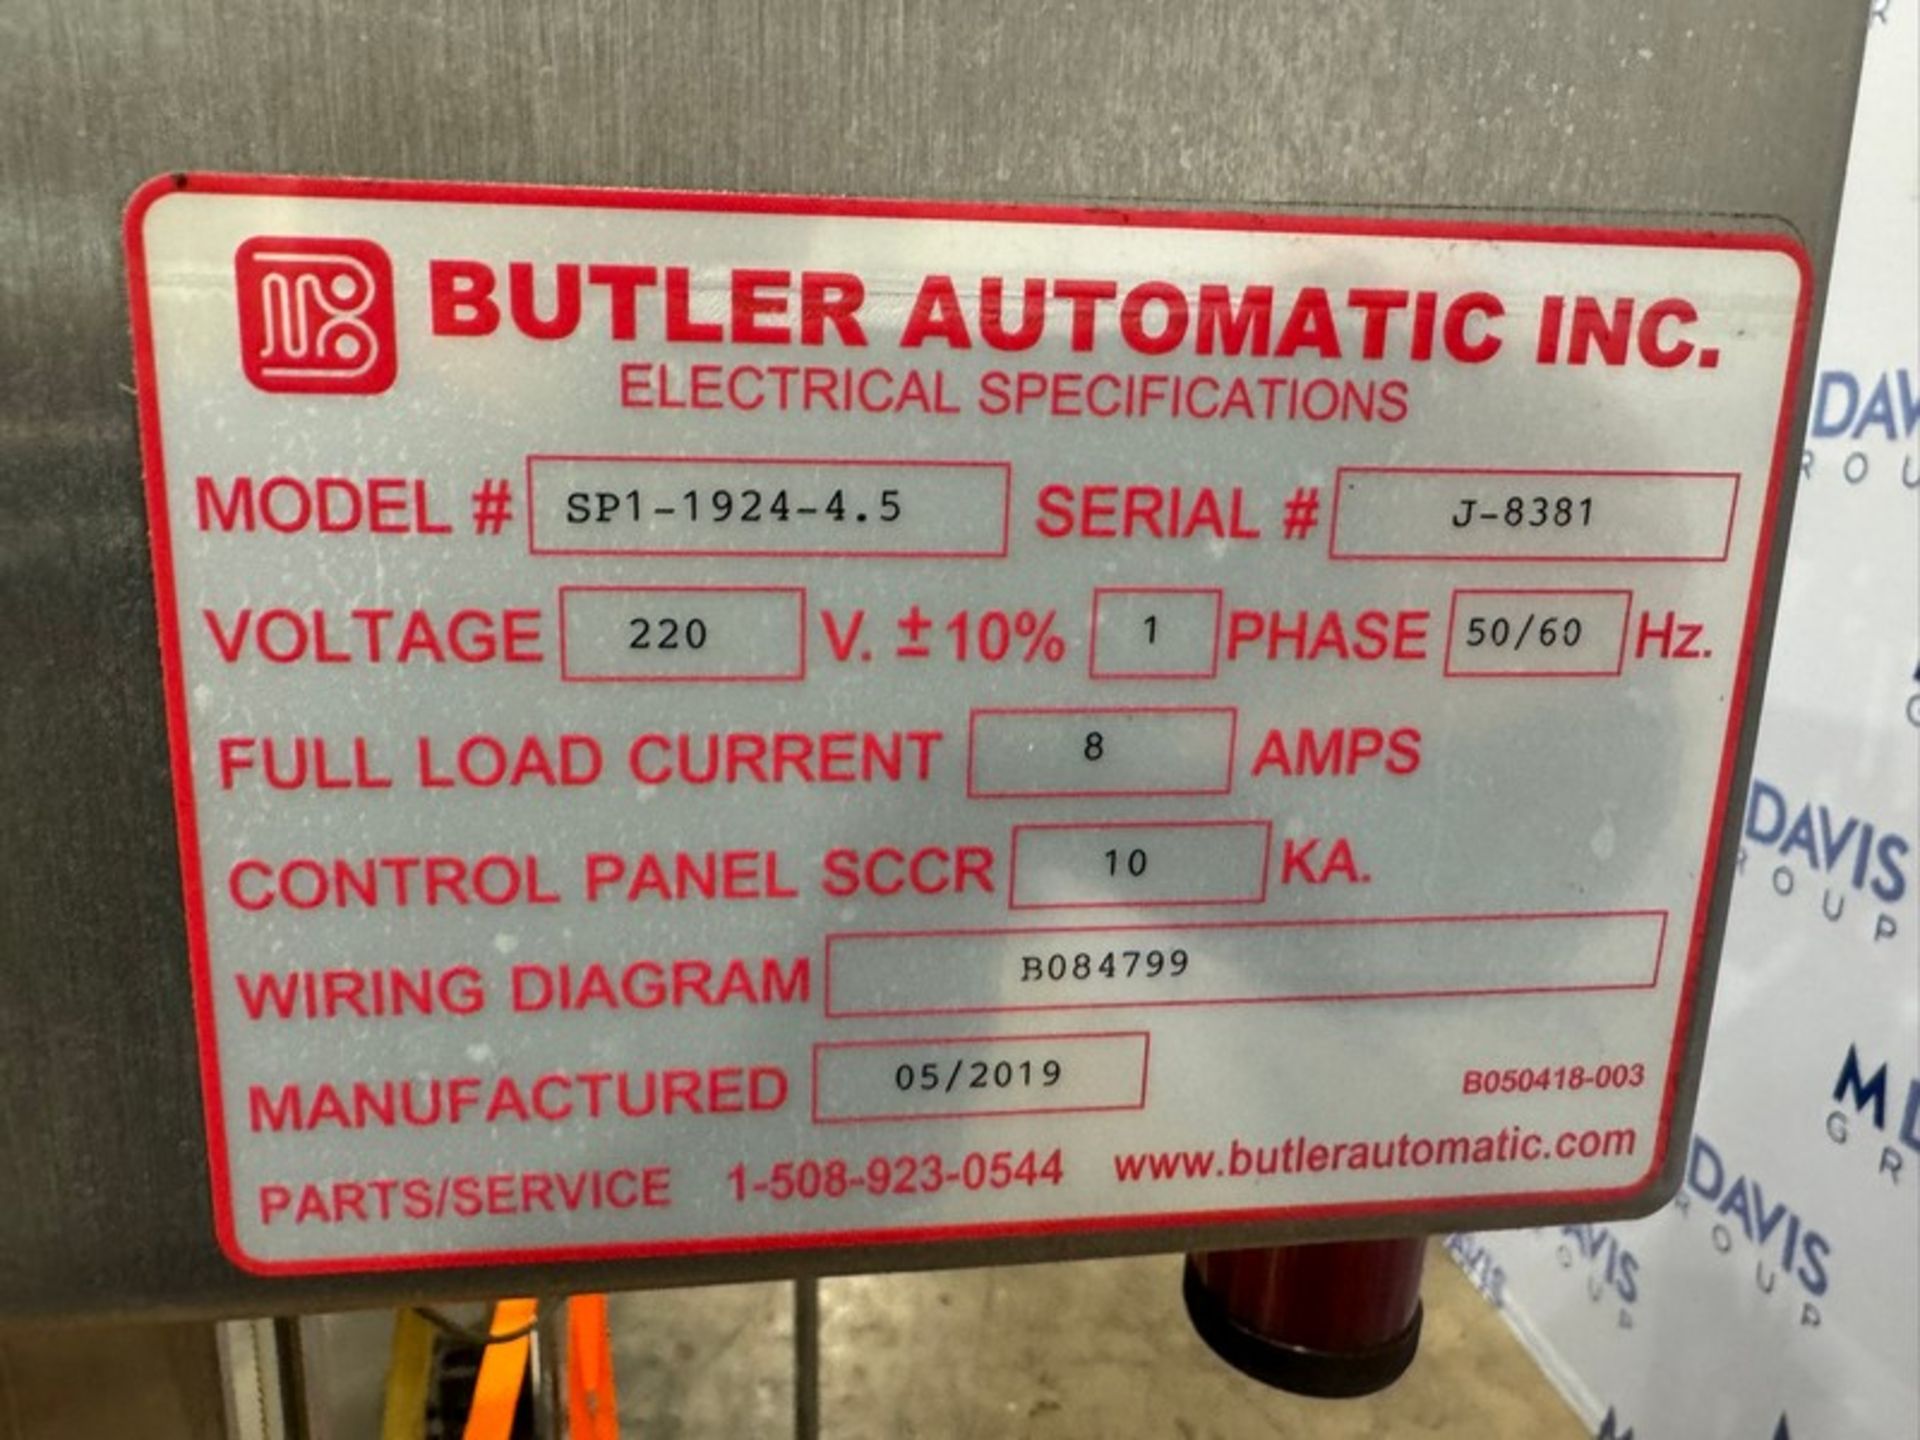 2019 Butler Automatic Inc. Splicer, M/N SP1-1924-4.5, S/N J-8381, 220 Volts, 1 Phase, S/S Control - Image 11 of 11